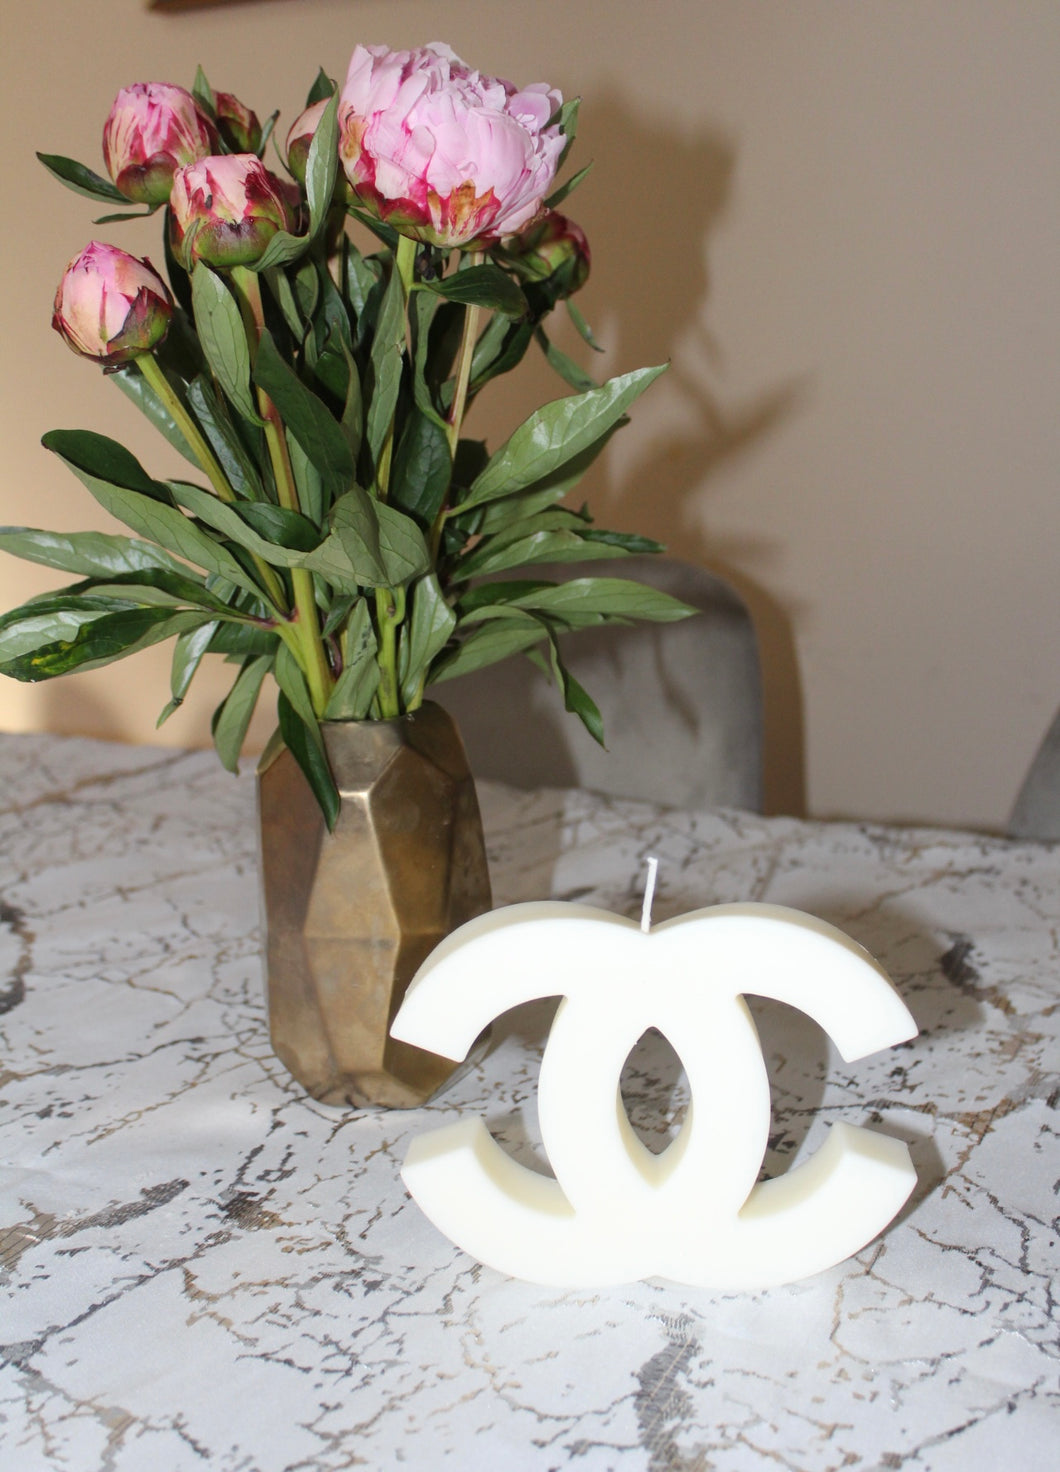 Chanel inspired candles – Luminare New York